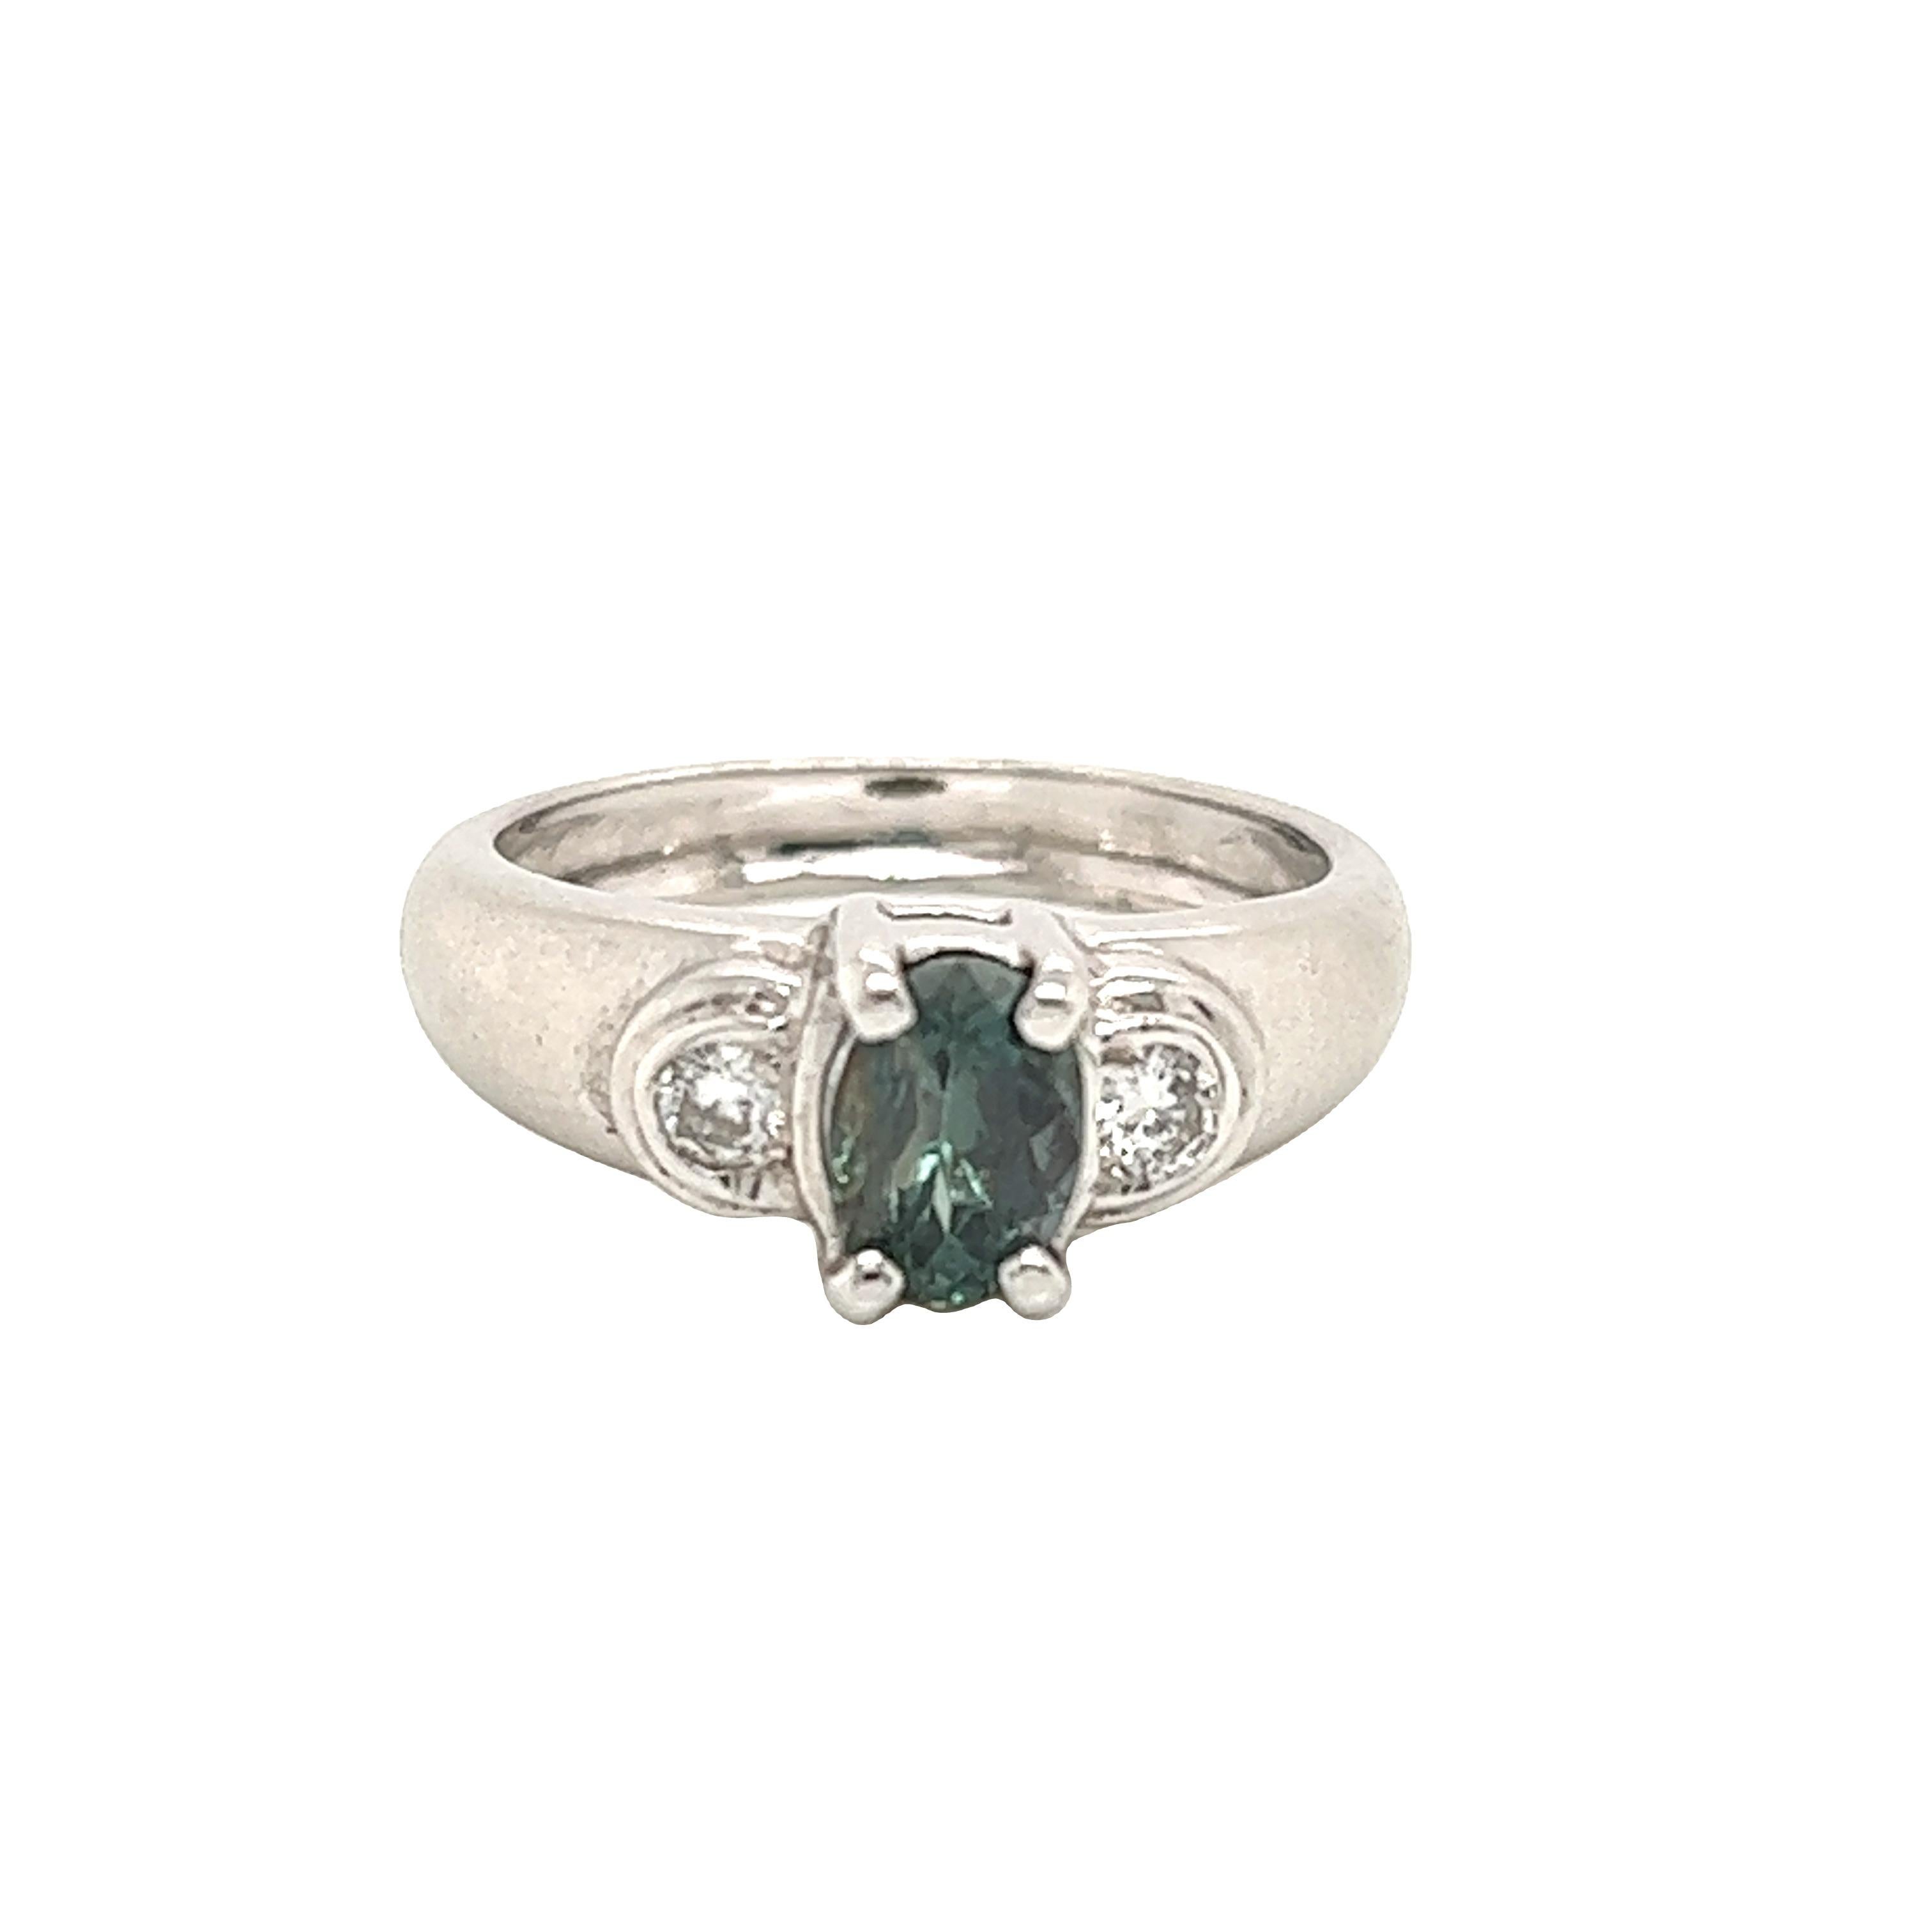 This is a gorgeous natural AAA quality oval Alexandrite surrounded by dainty diamonds that is set in a vintage White Gold setting. This ring features a natural 1.00 carat oval alexandrite that is certified by the Gemological Institute of America